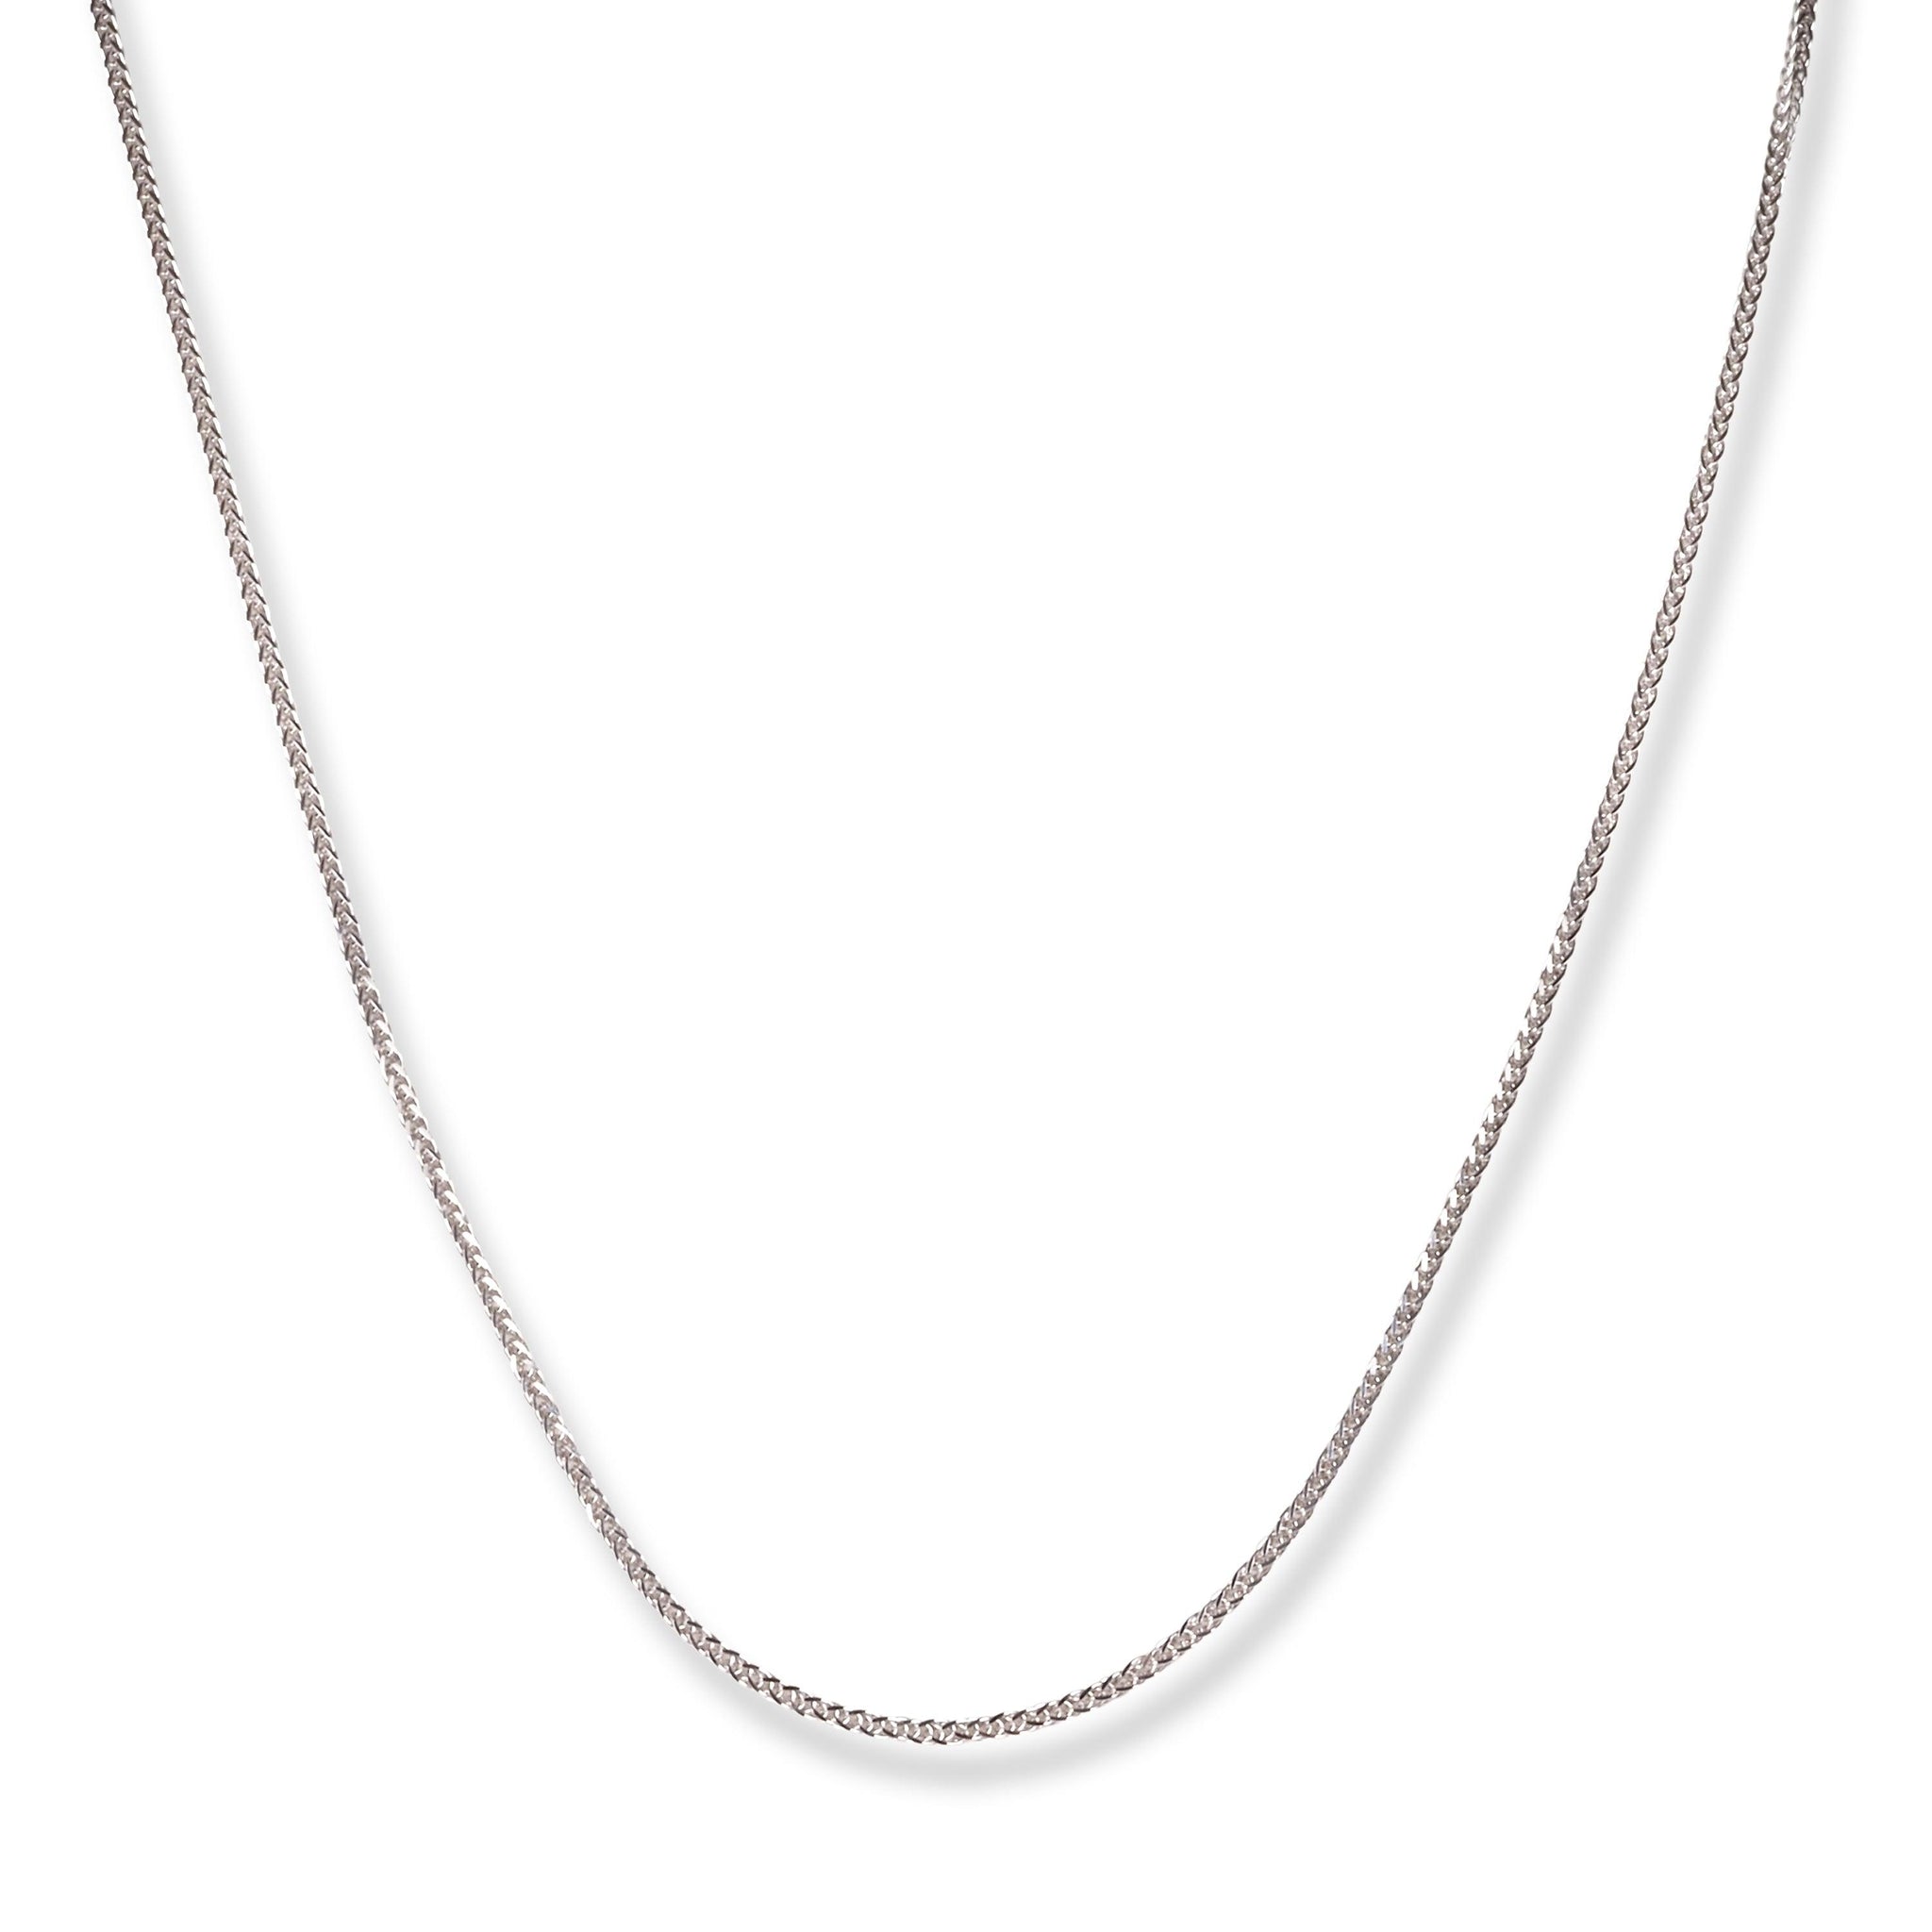 18ct White Gold Foxtail Chain with Lobster Clasp C-3803